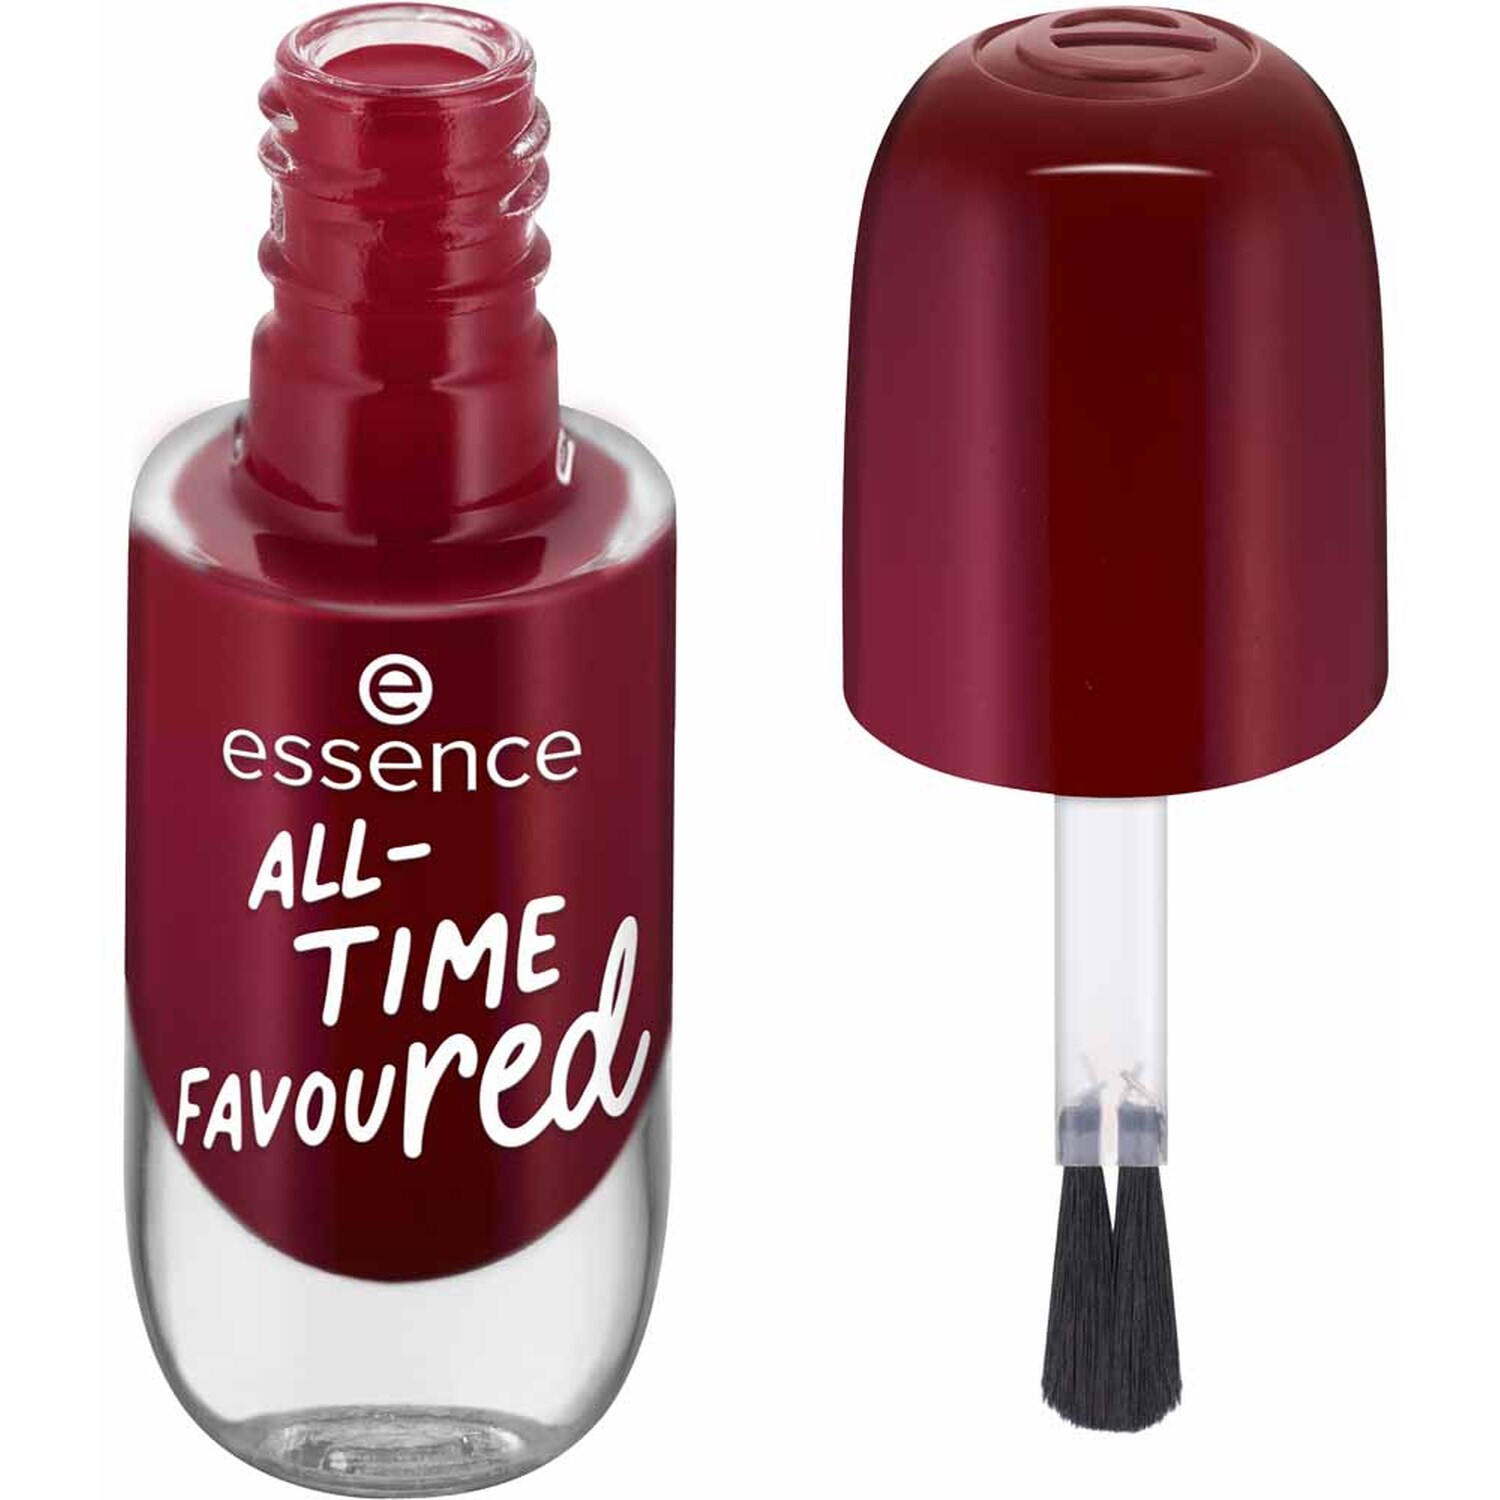 essence Gel Nail Colour - All Time FavouRED Image